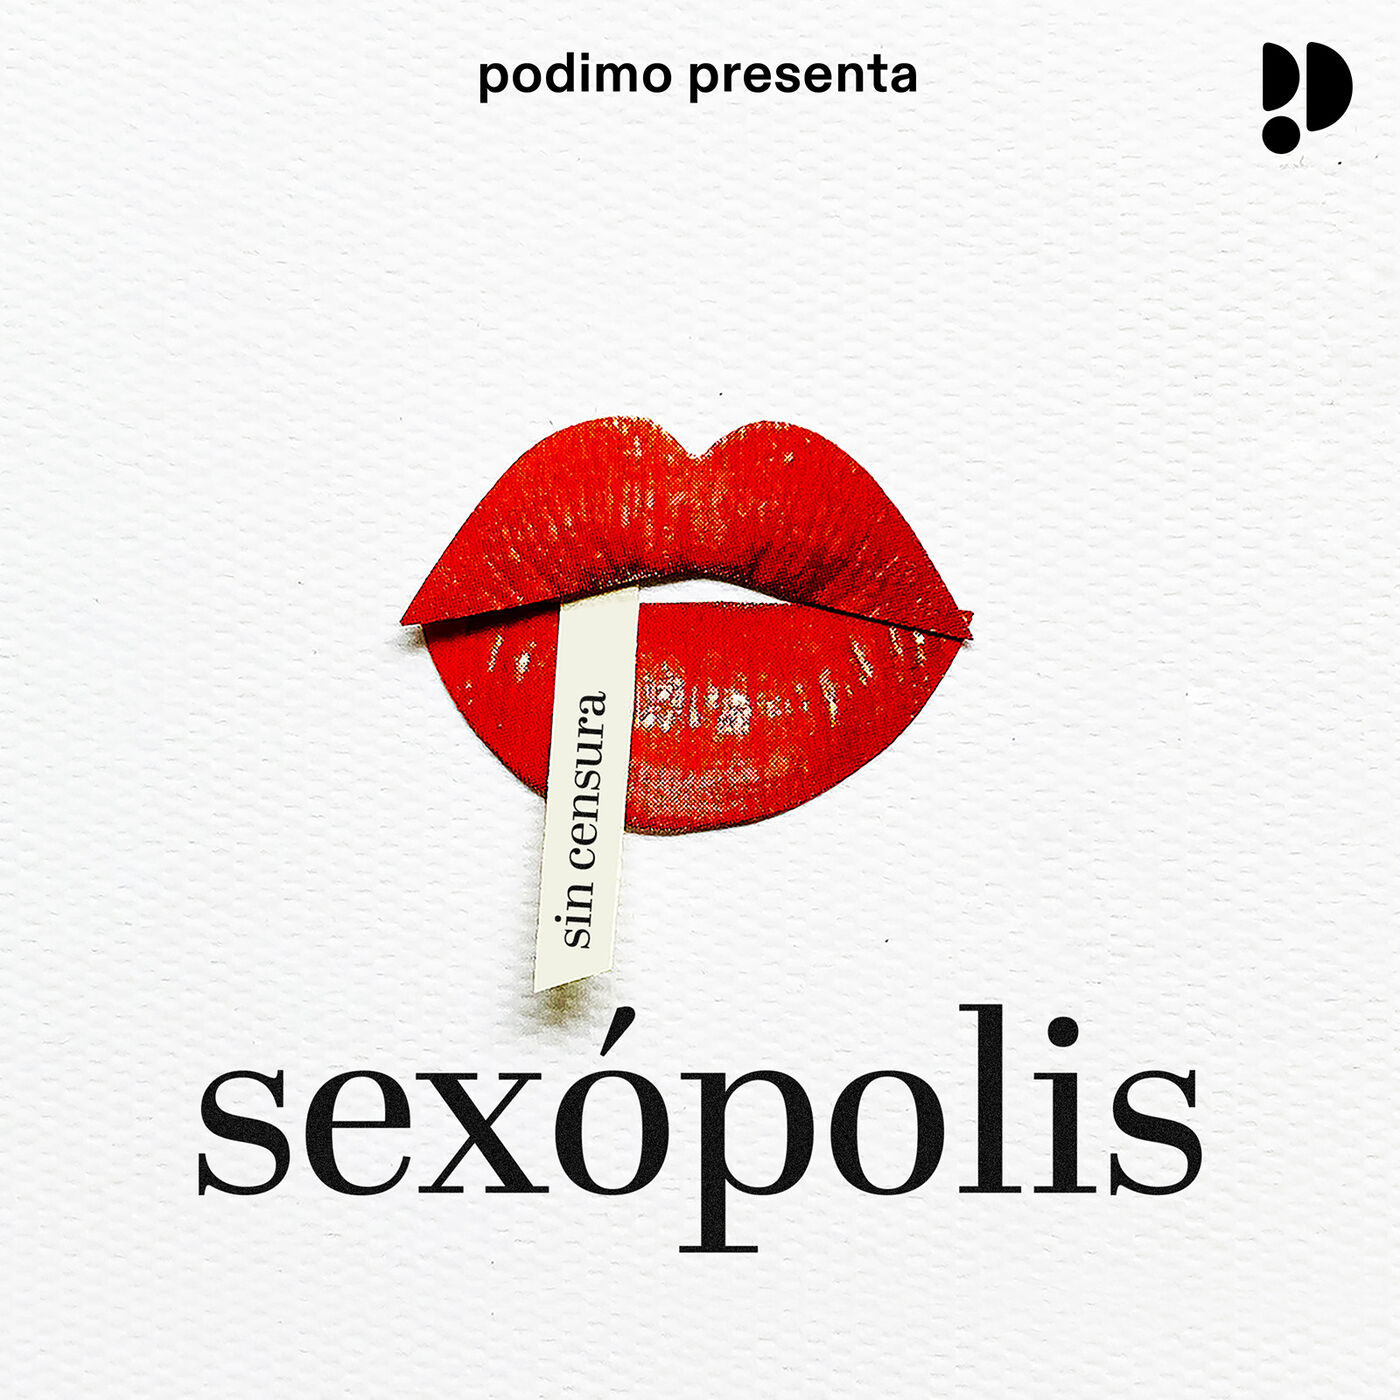 Three podcasts on Spotify that talk about sex and relationships. 